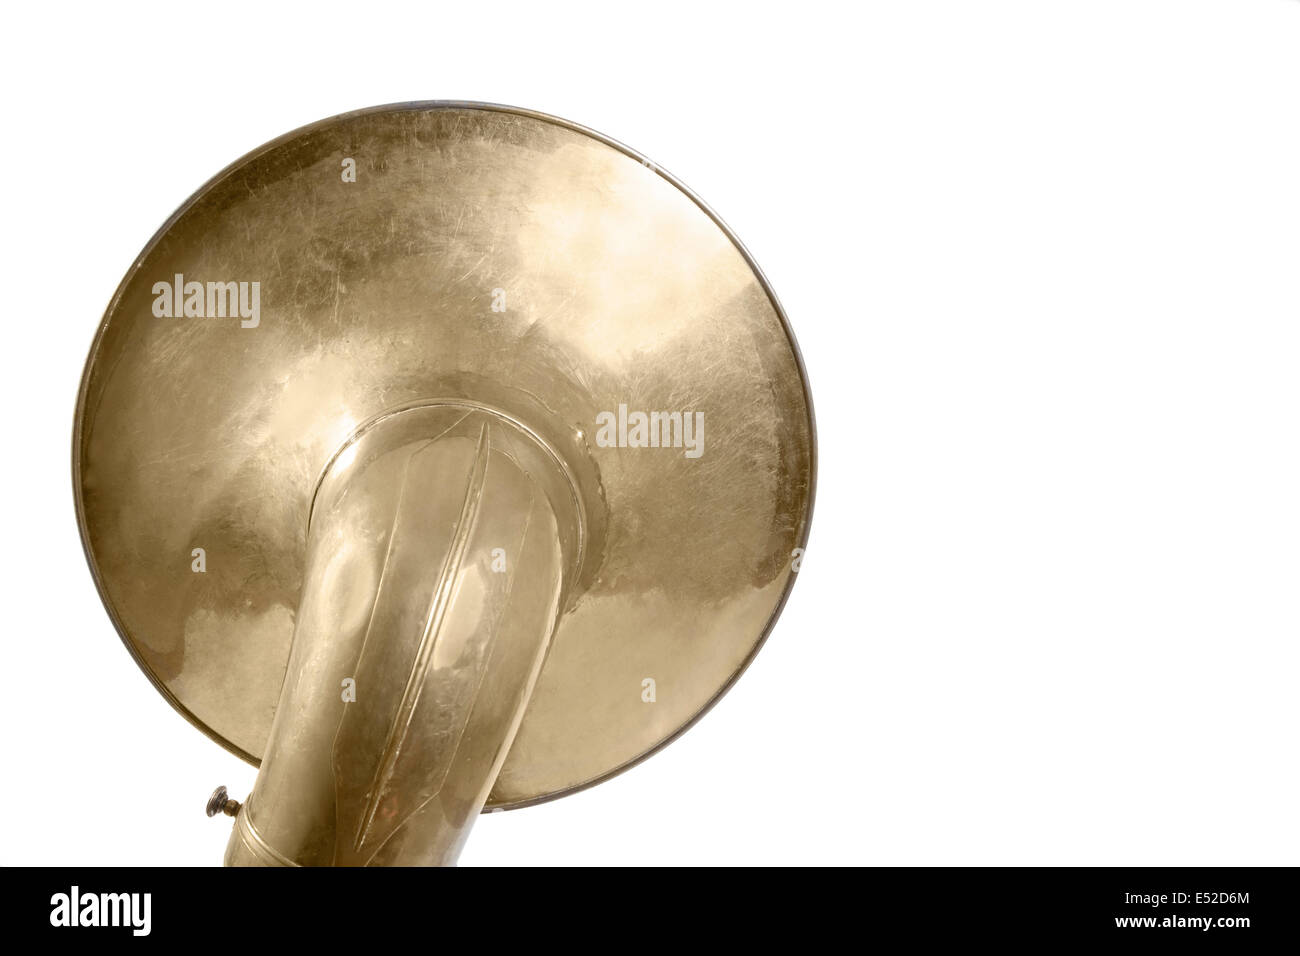 Back view of sousaphone Stock Photo